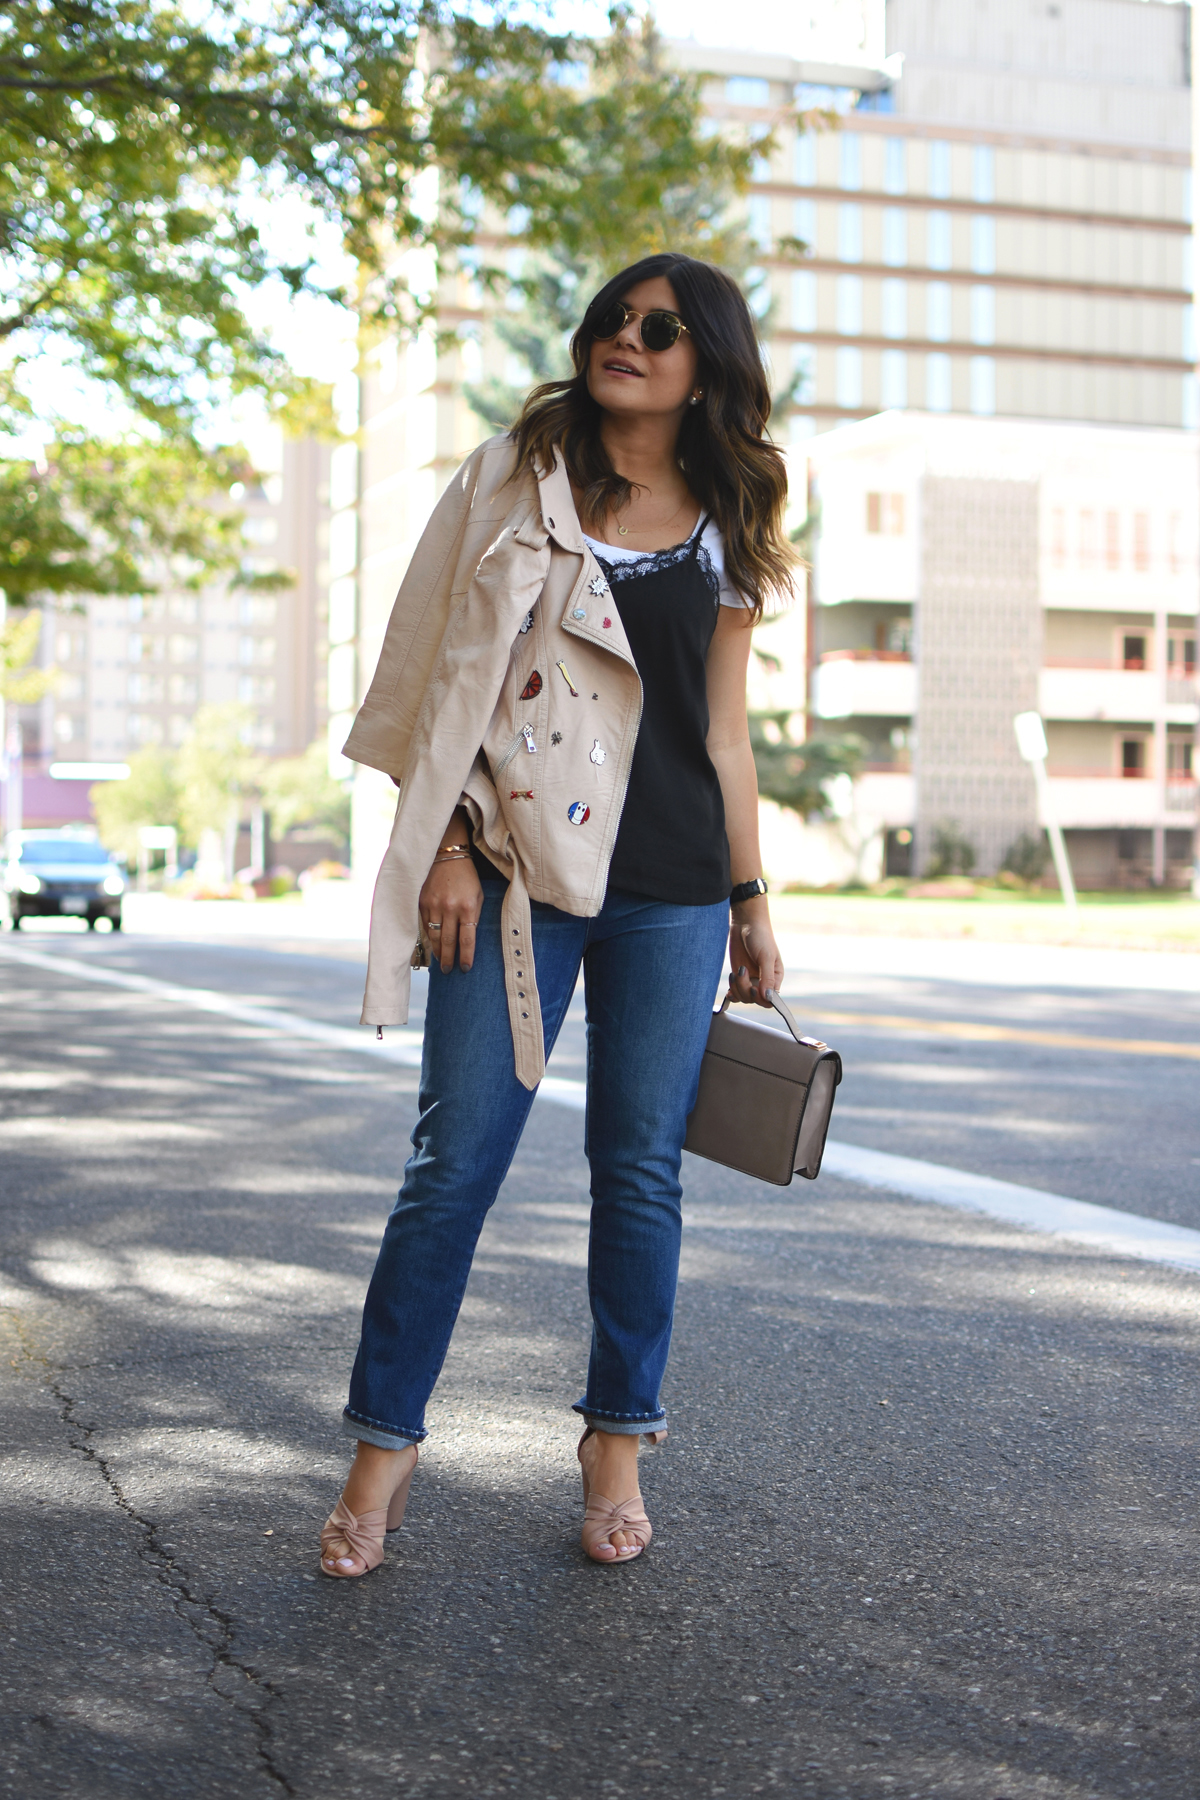 Carolina Hellal of Chic Talk wearing a Dezzal blush faux leather jacket, Forever 21 lace black camisol, Madewell jeans, Rayban rounded sunglasses, and Topshop blush lace up sandals.